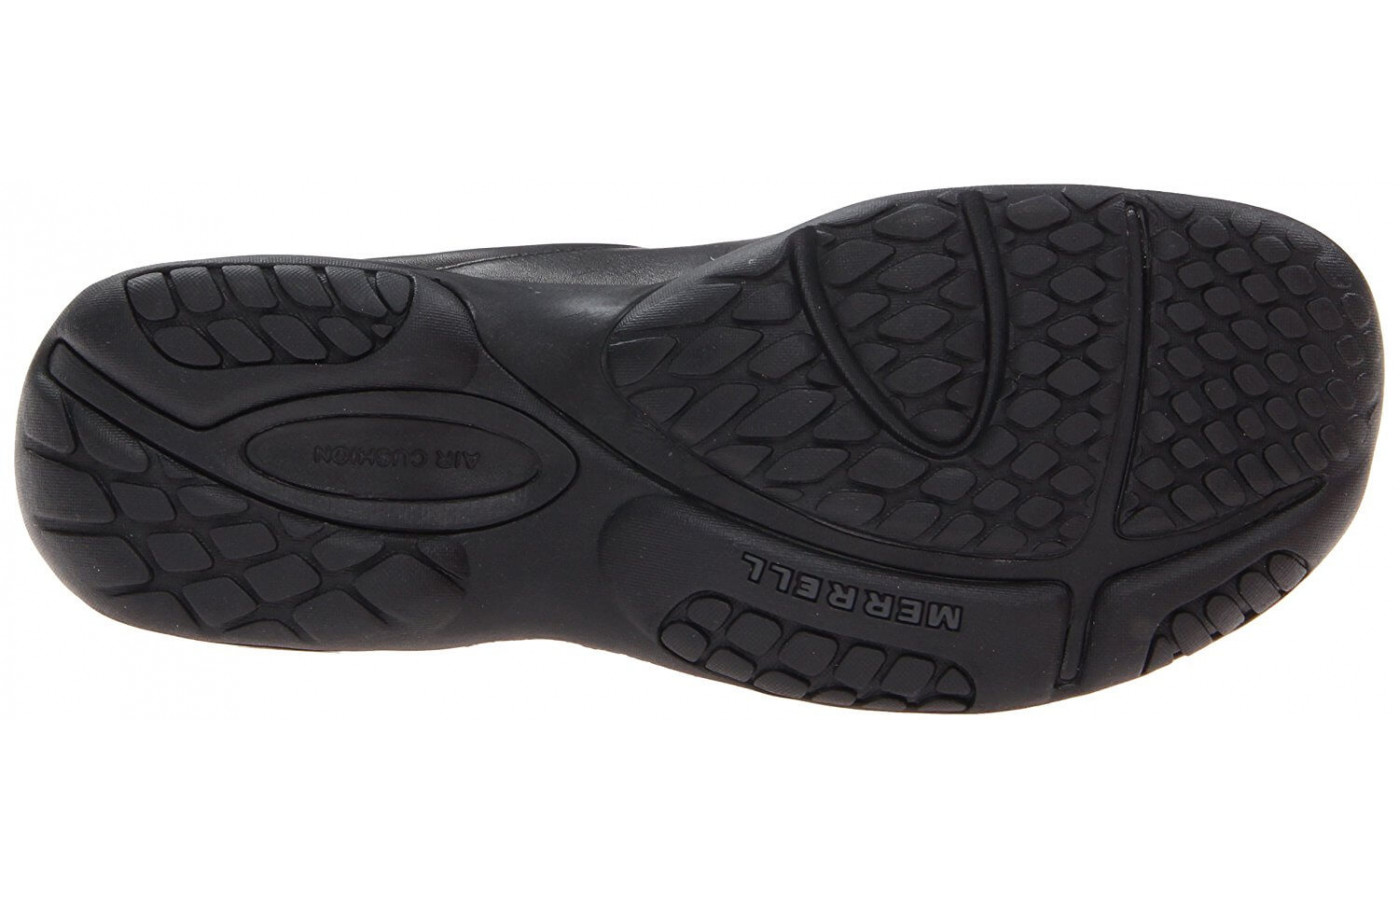 The Merrell Encore Gust has a rubber M Select Grip outsole